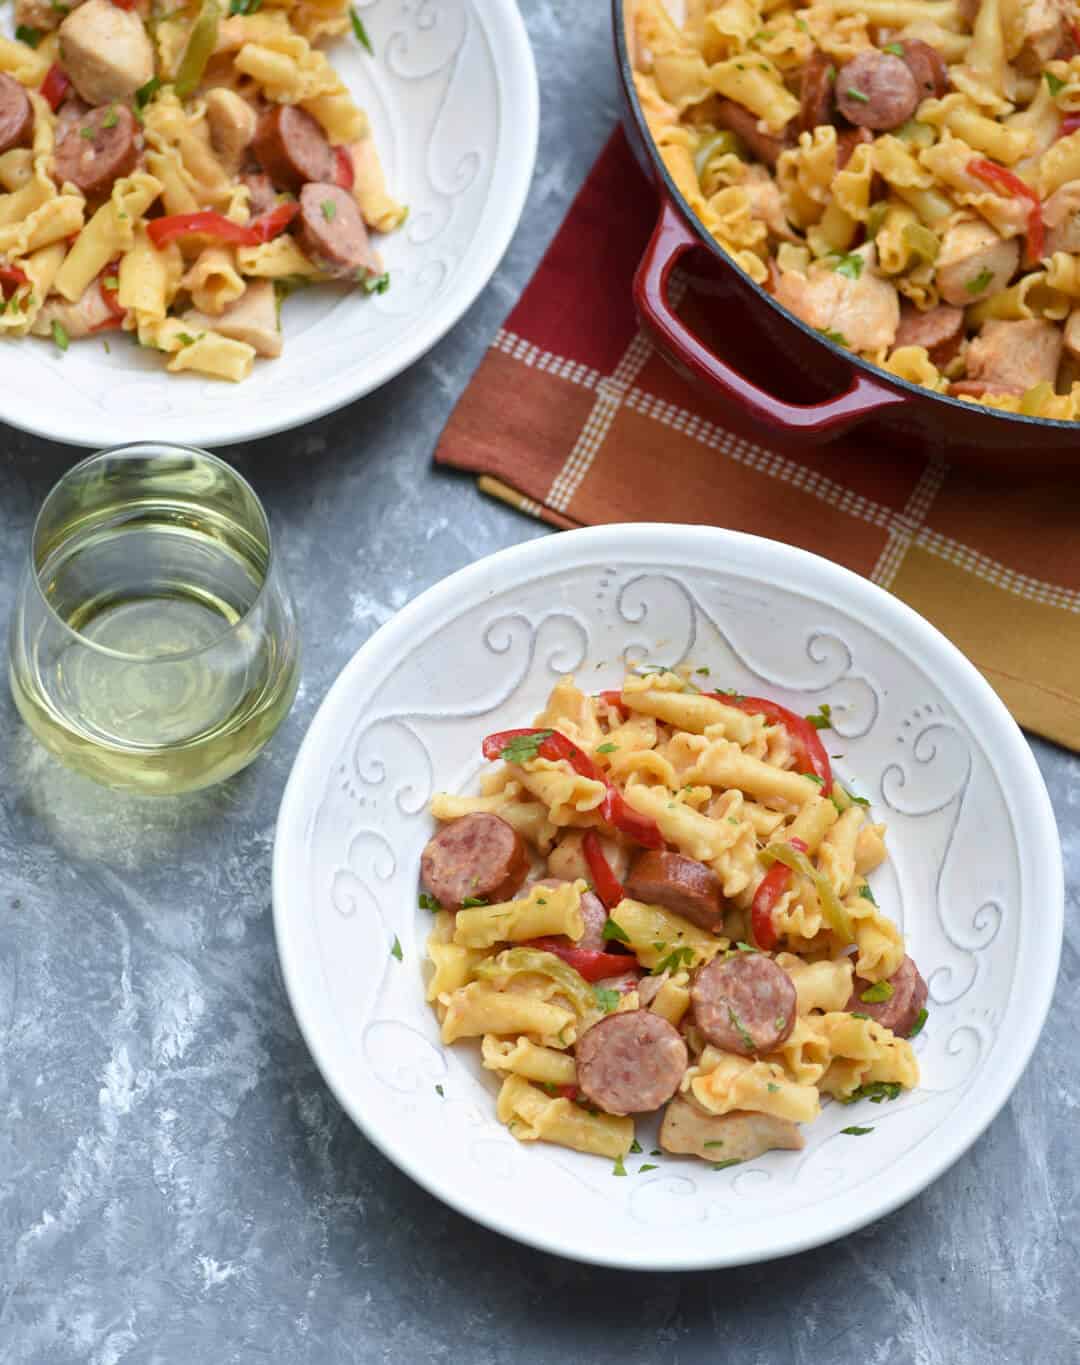 Pasta with sausage in a white bowl.